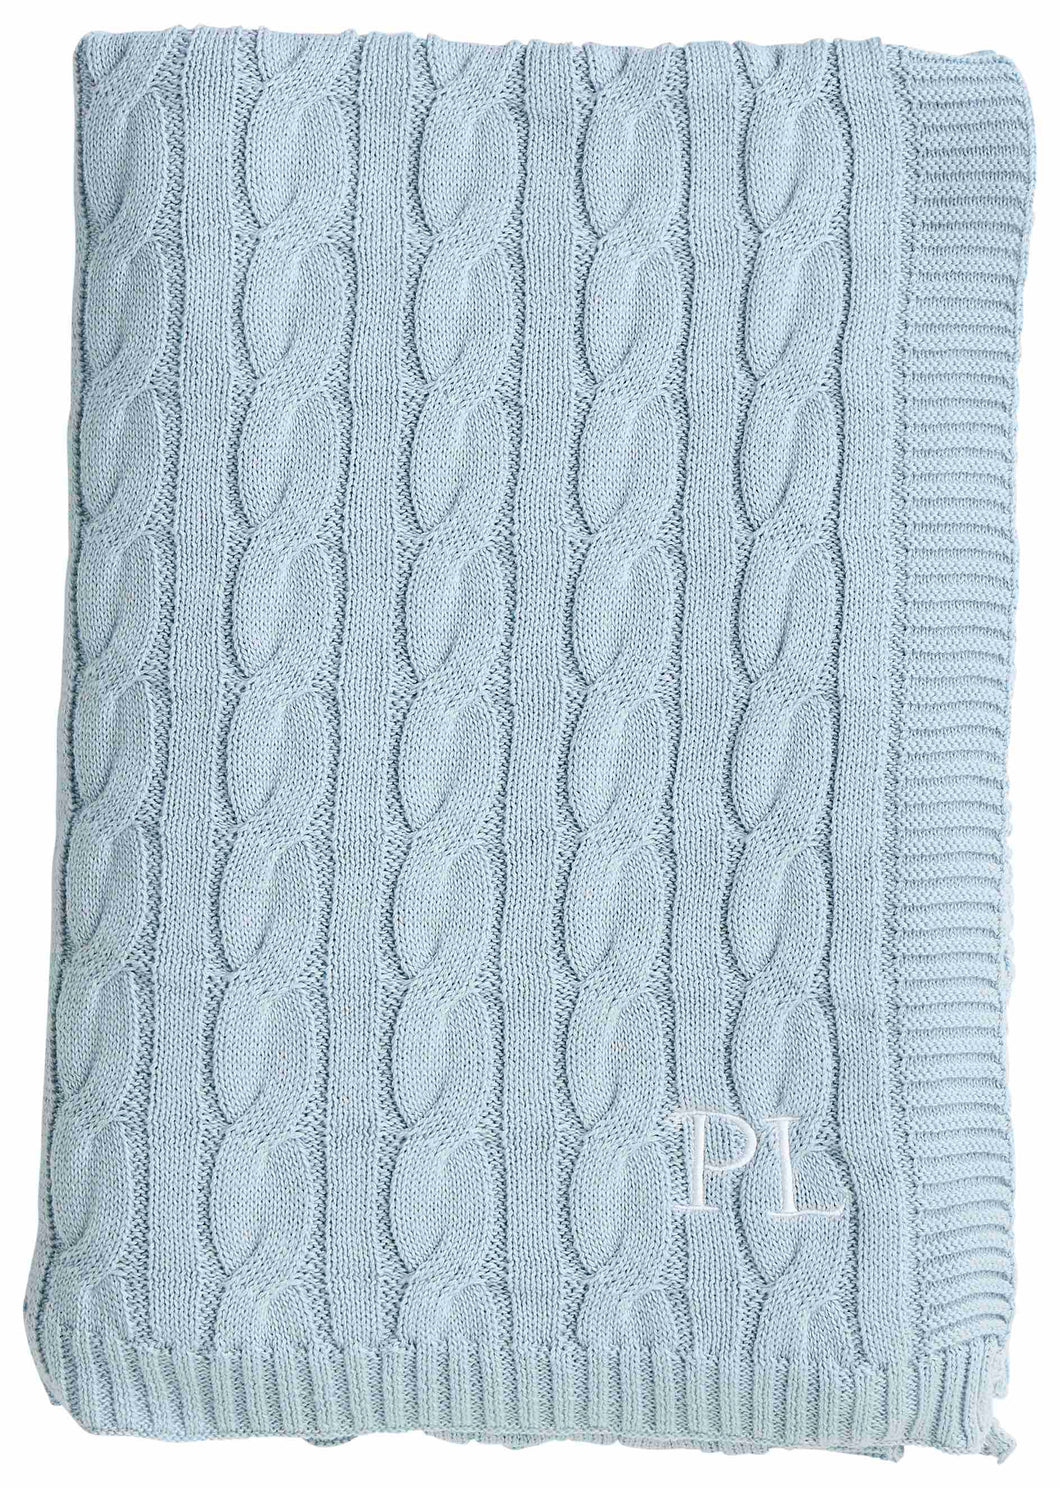 Sky blue cable knit throw (130 x 170)